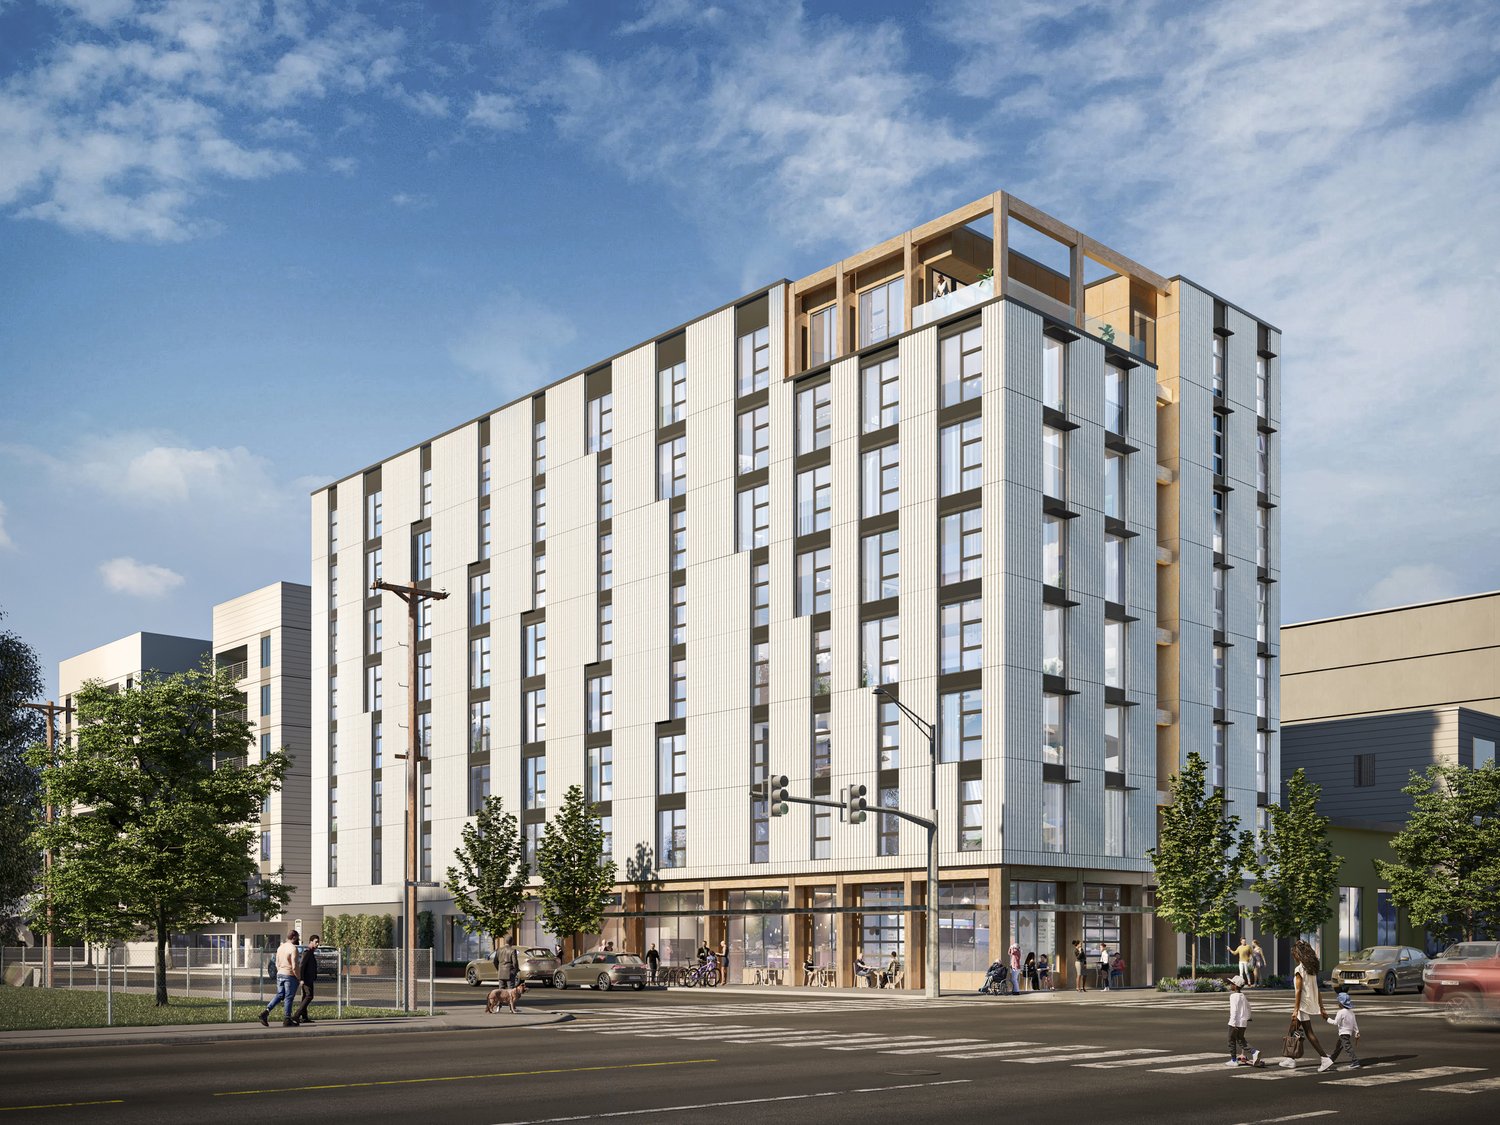 Portland's Timberview VIII  mass timber tower will offer more than 100 affordable units. Rendering: Access Architecture